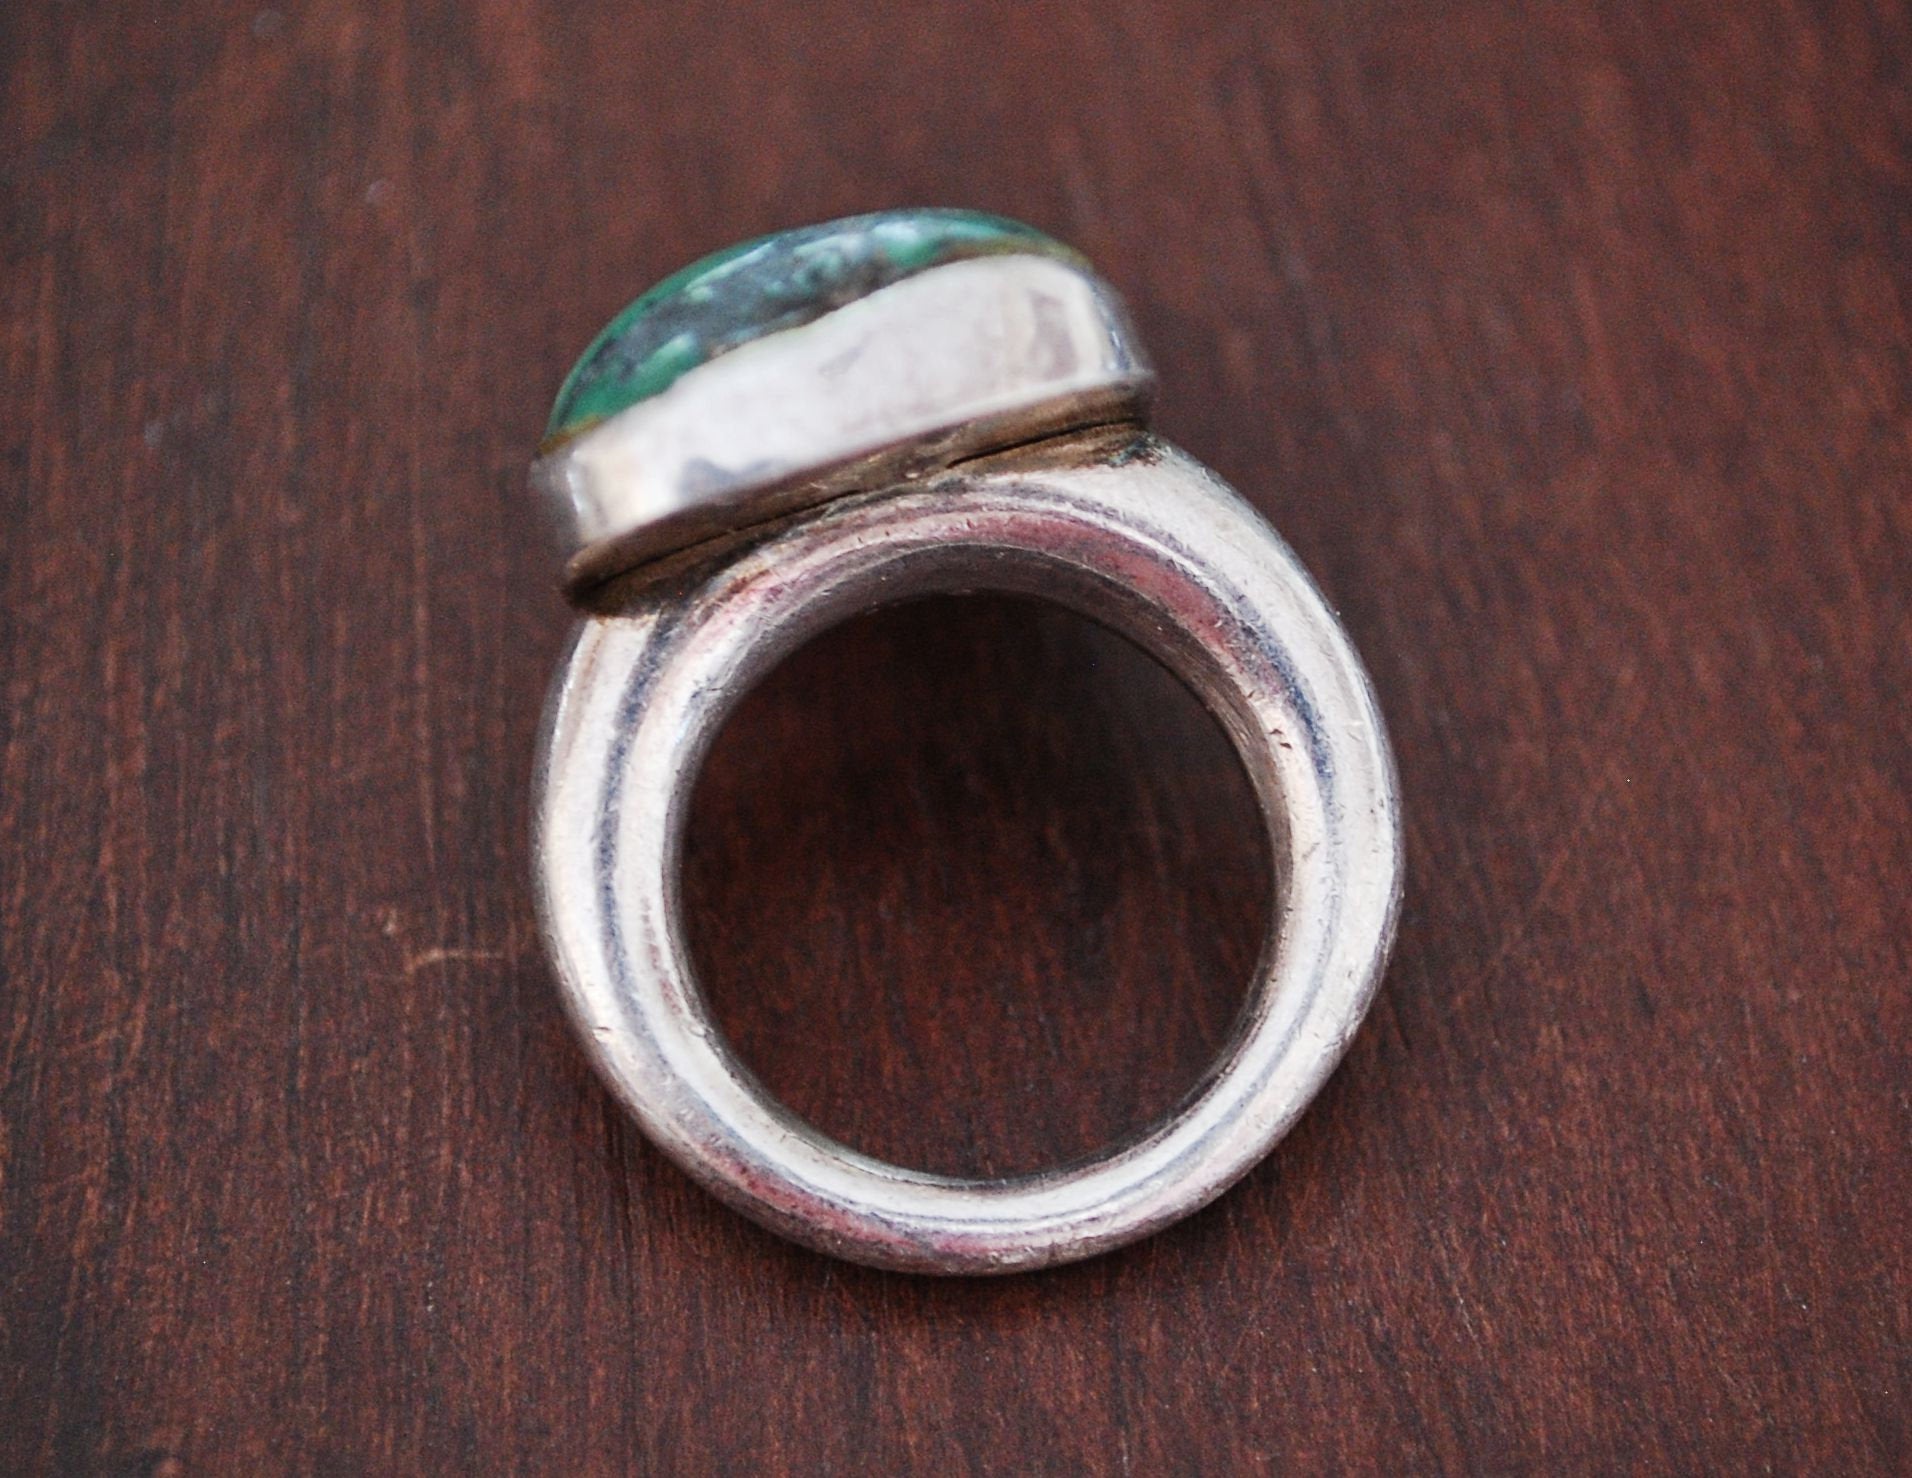 Turquoise Nugget Ring - Size 7.5 - Turquoise Ring - Indian Turquoise Ring - Turquoise Nugget Ring